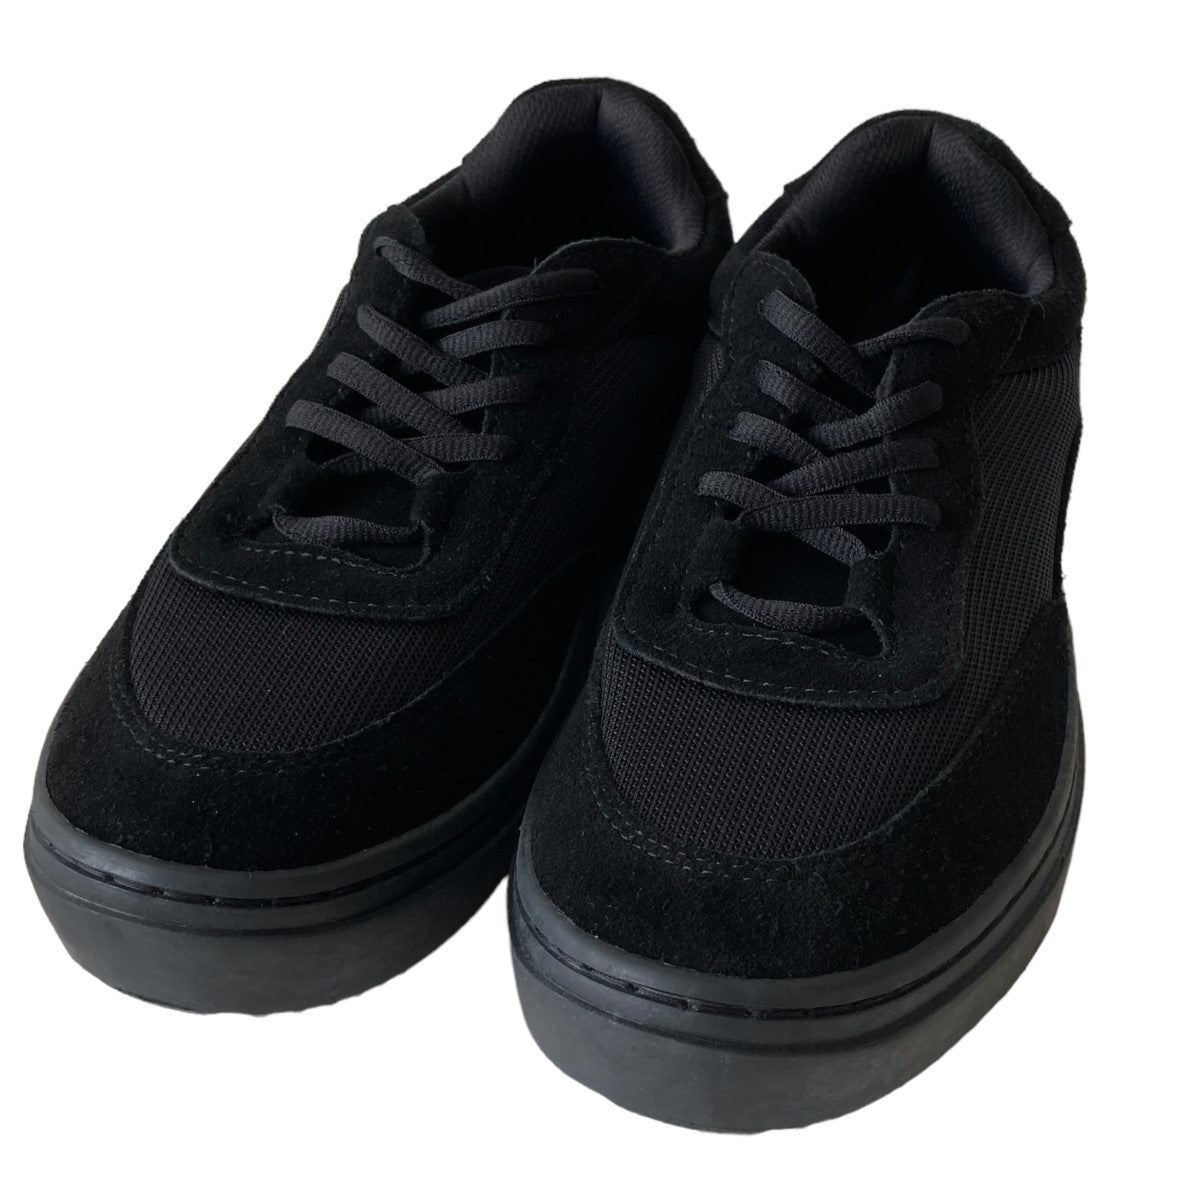 COMME des GARCONS HOMME(コムデギャルソンオム) 23AW Suede mesh 